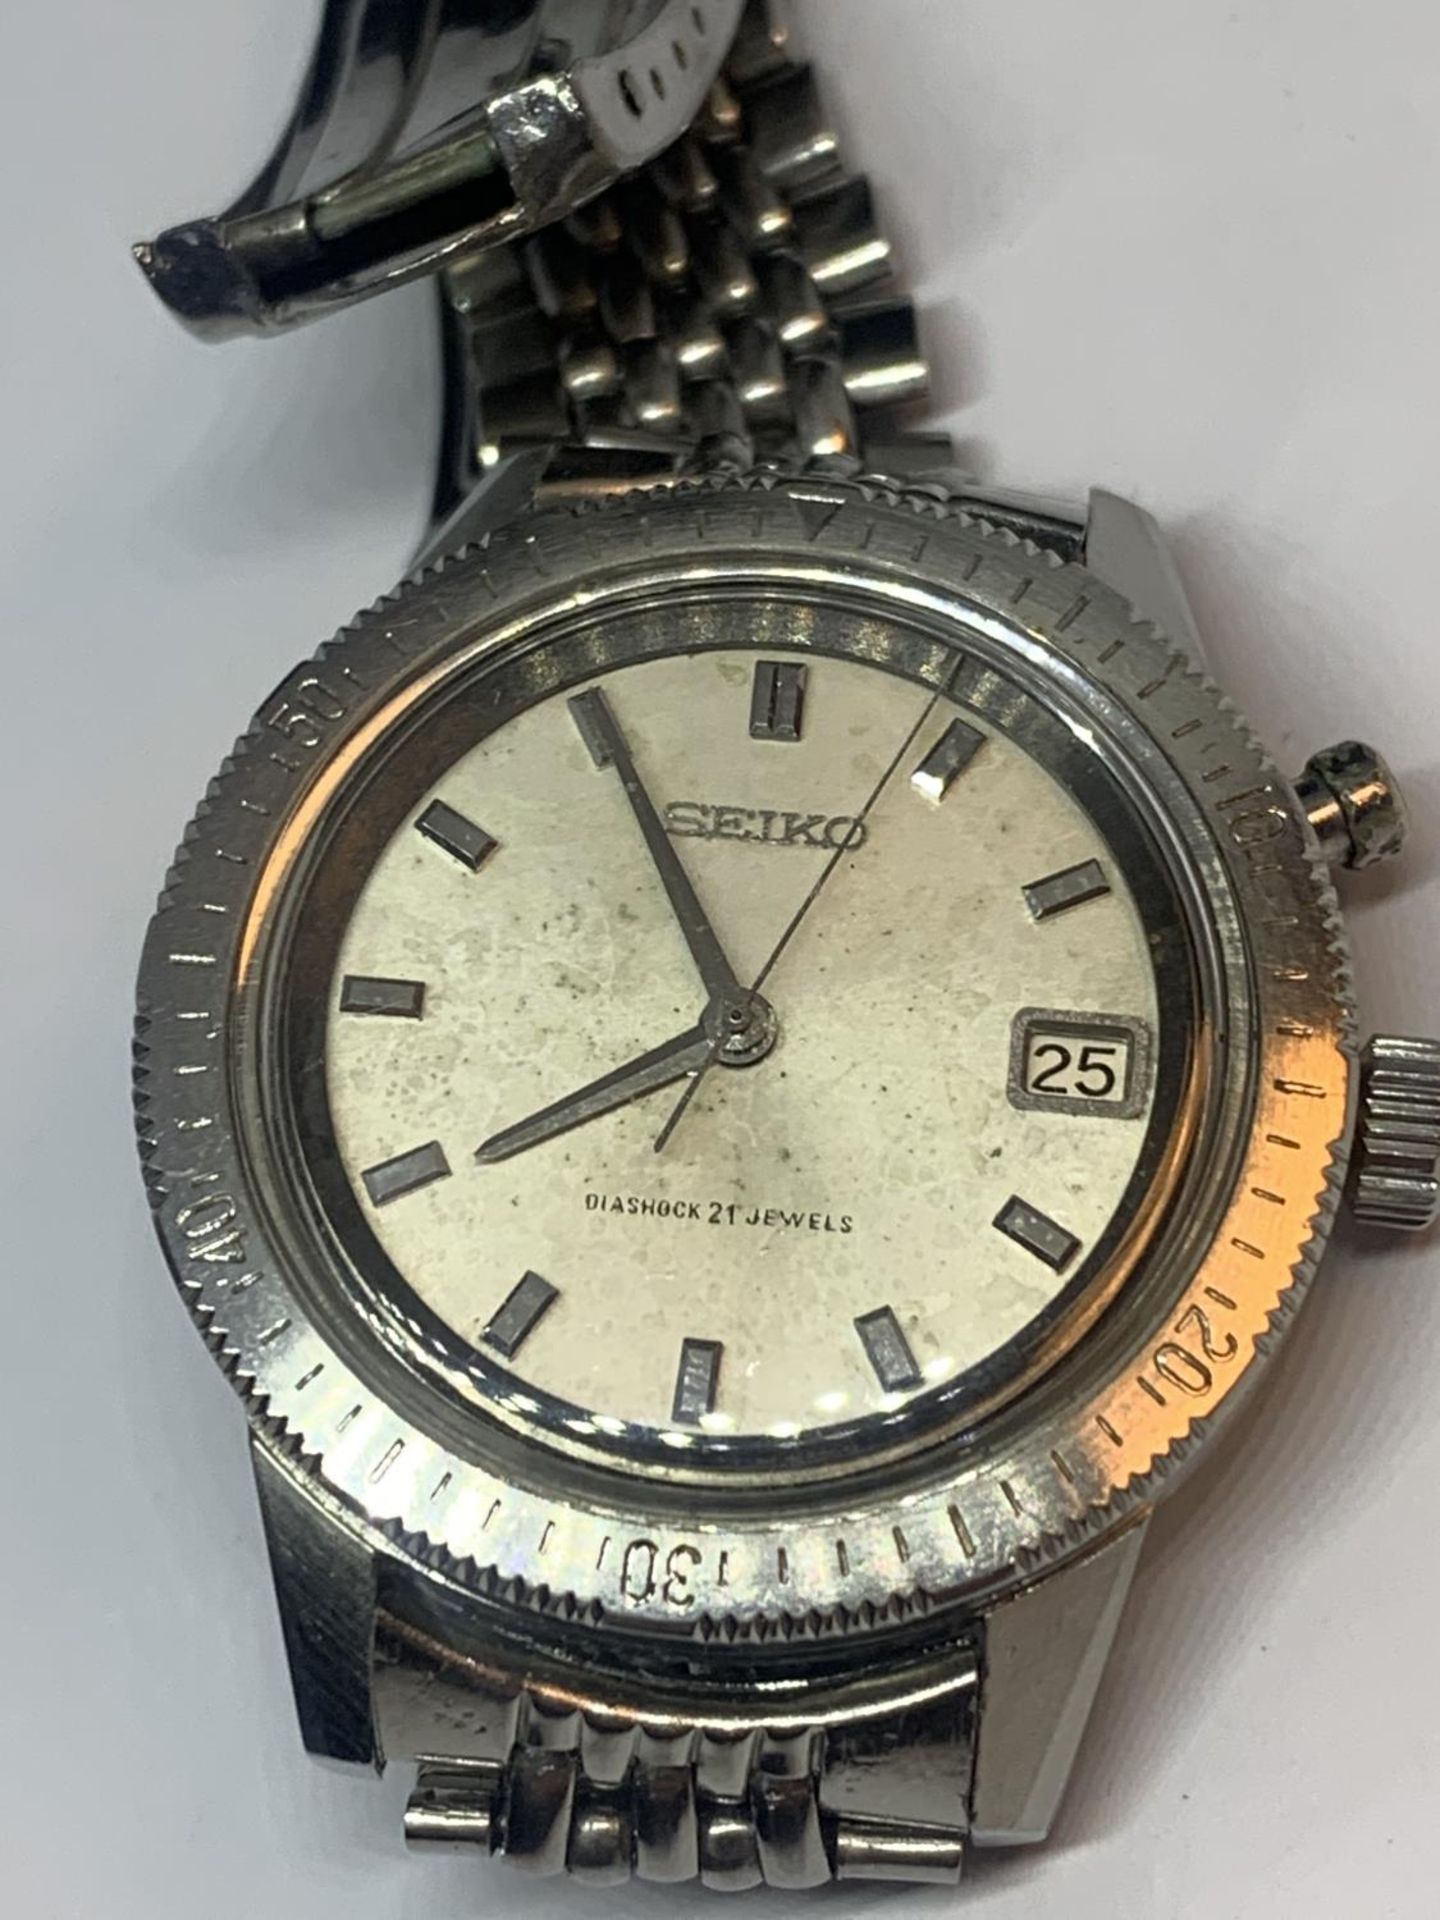 A SEIKO MONOPUSHER CHRONOGRAPH WATCH 5717-8990 SEEN WORKING BUT NO WARRANTY - Image 2 of 4